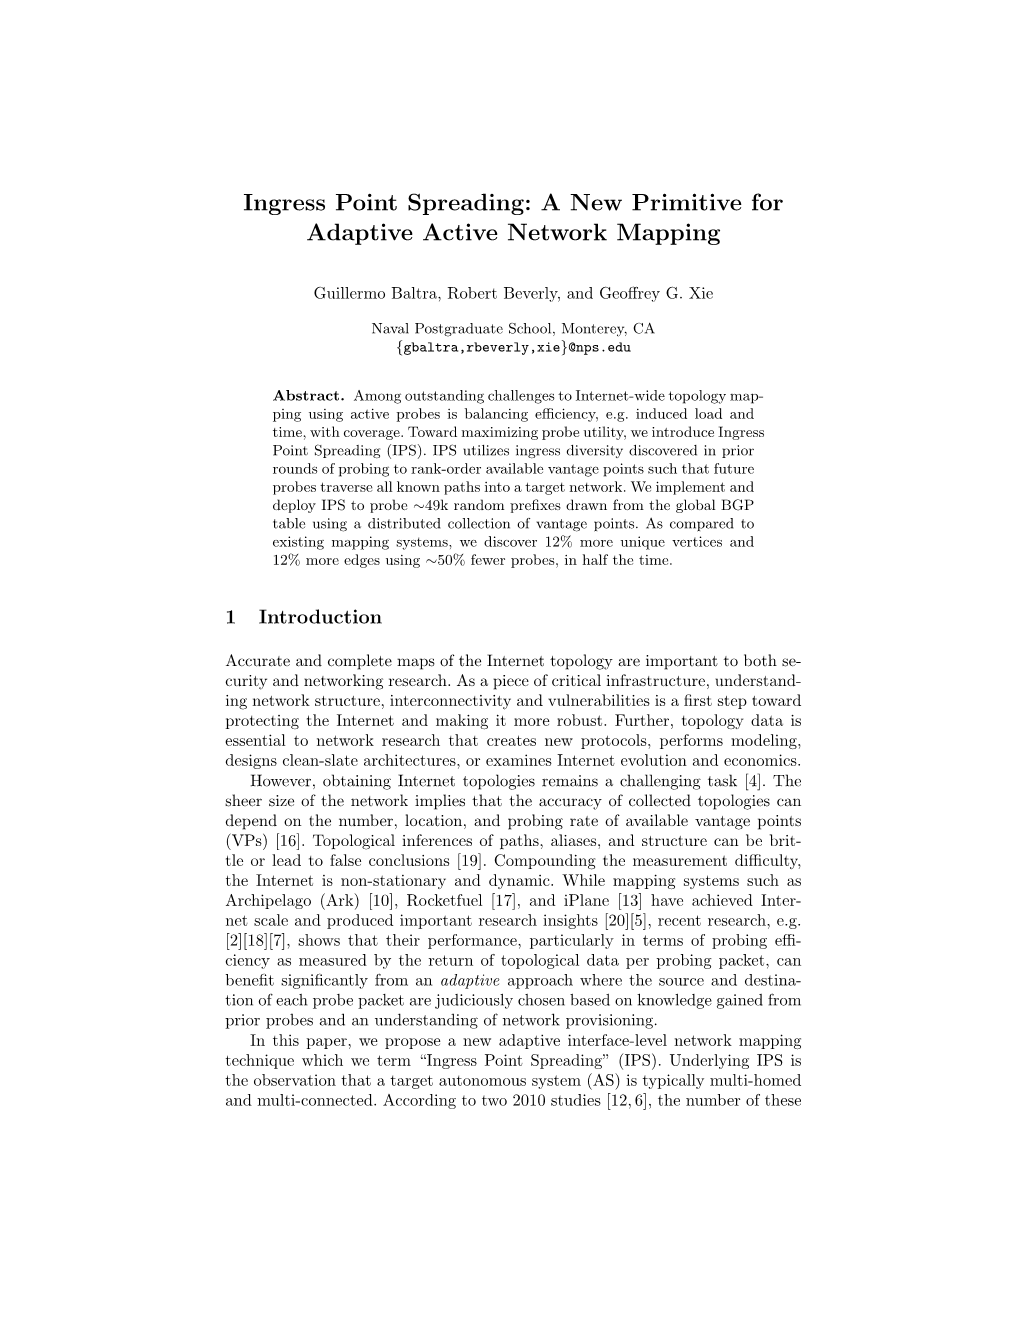 Ingress Point Spreading: a New Primitive for Adaptive Active Network Mapping